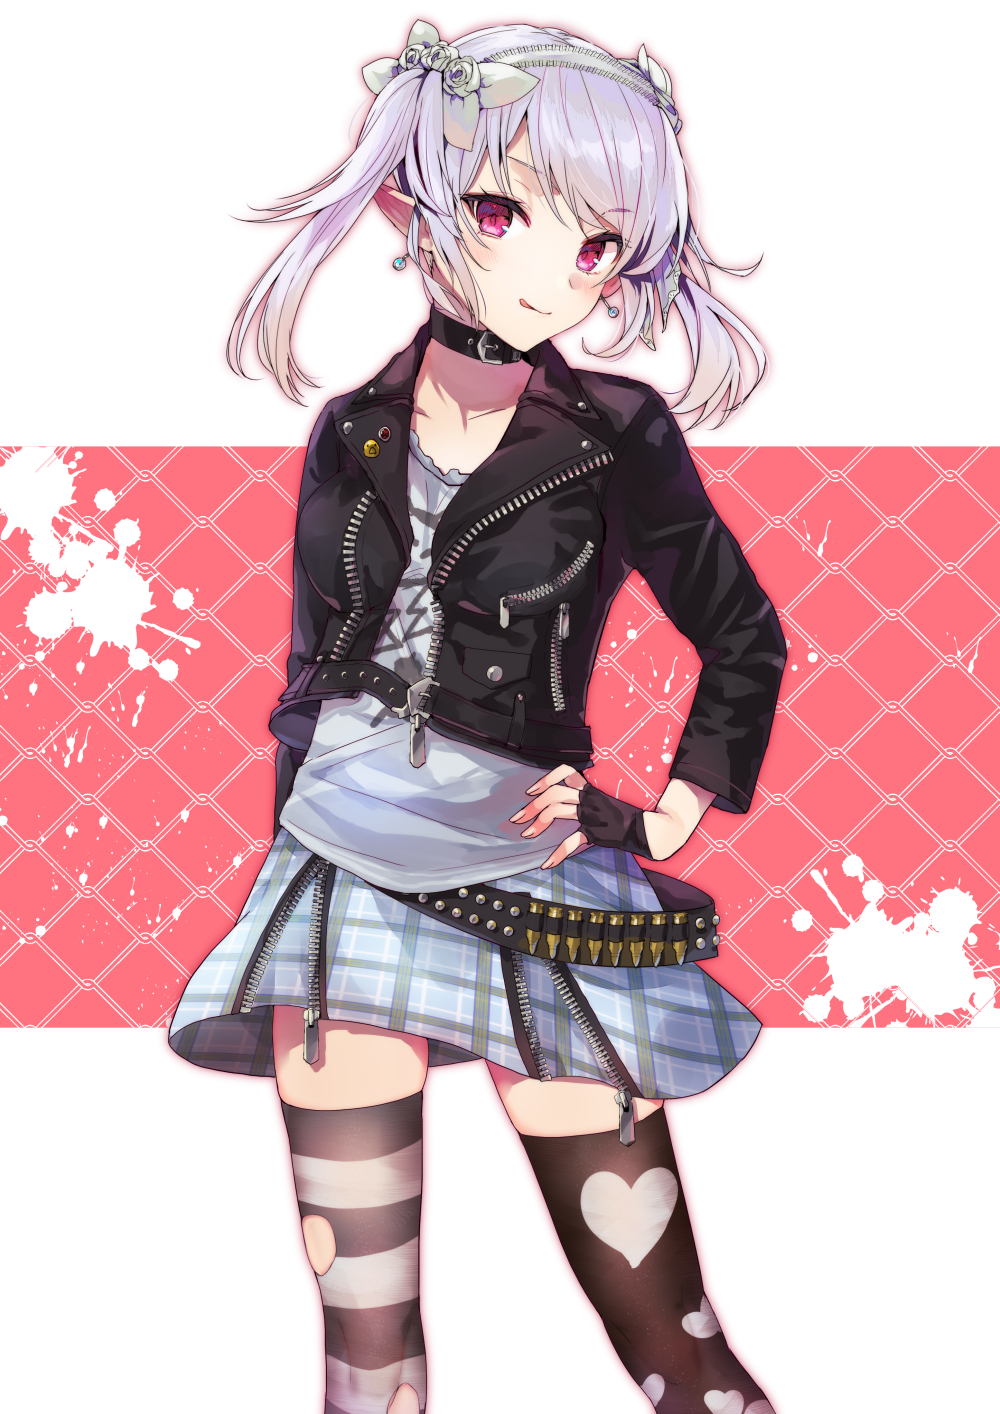 Anime 1000x1414 anime anime girls digital art artwork 2D portrait display Tomozero pointy ears tongue out silver hair pink eyes leather jacket thigh-highs